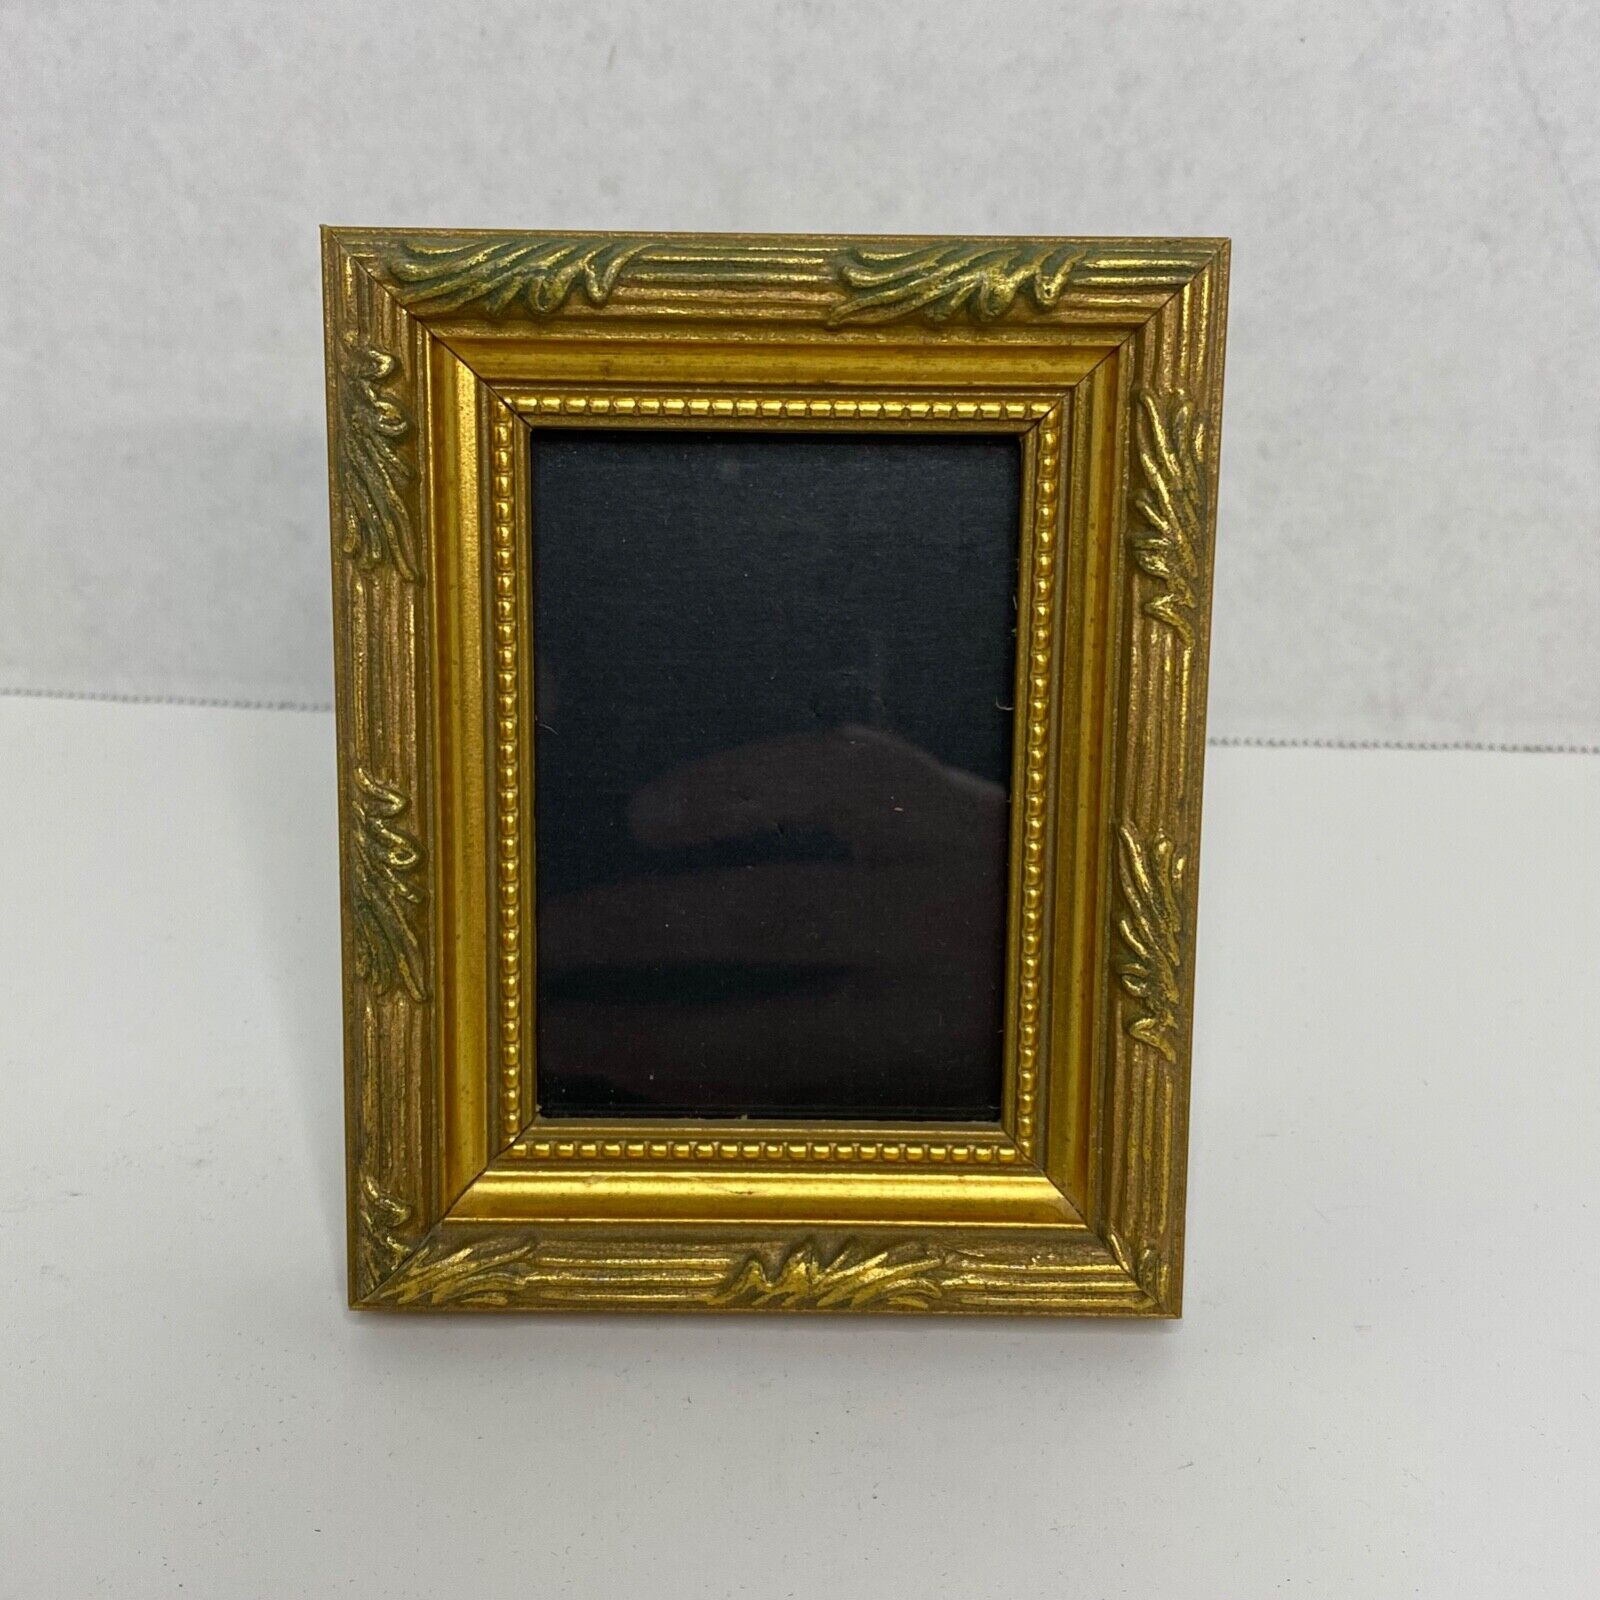 Small Gold Picture Frame Easel Back Ornate Decorative for 2x3 ...